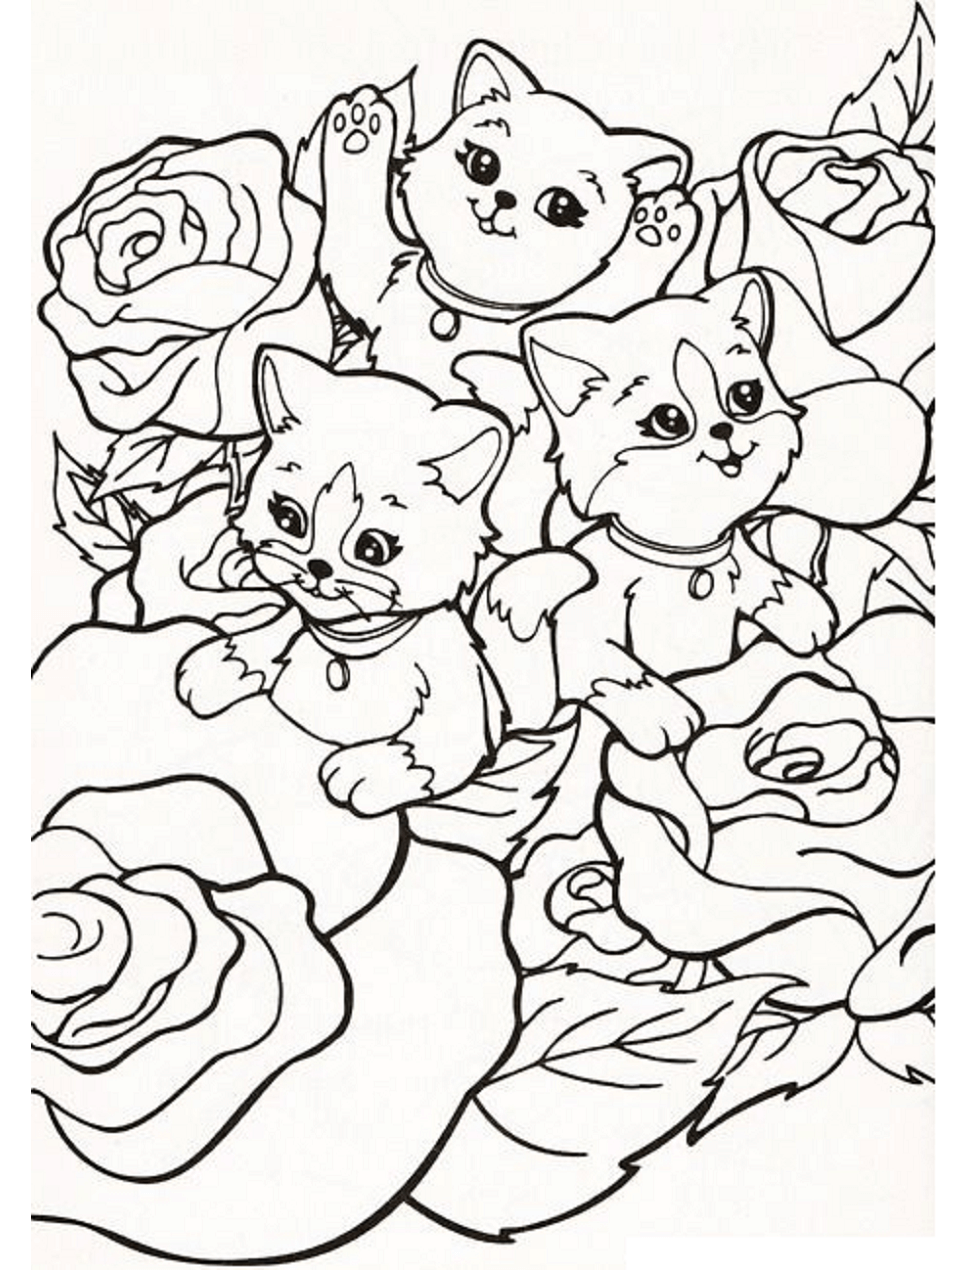 Cats With Roses From Lisa Frank Coloring Page - Free Printable Coloring